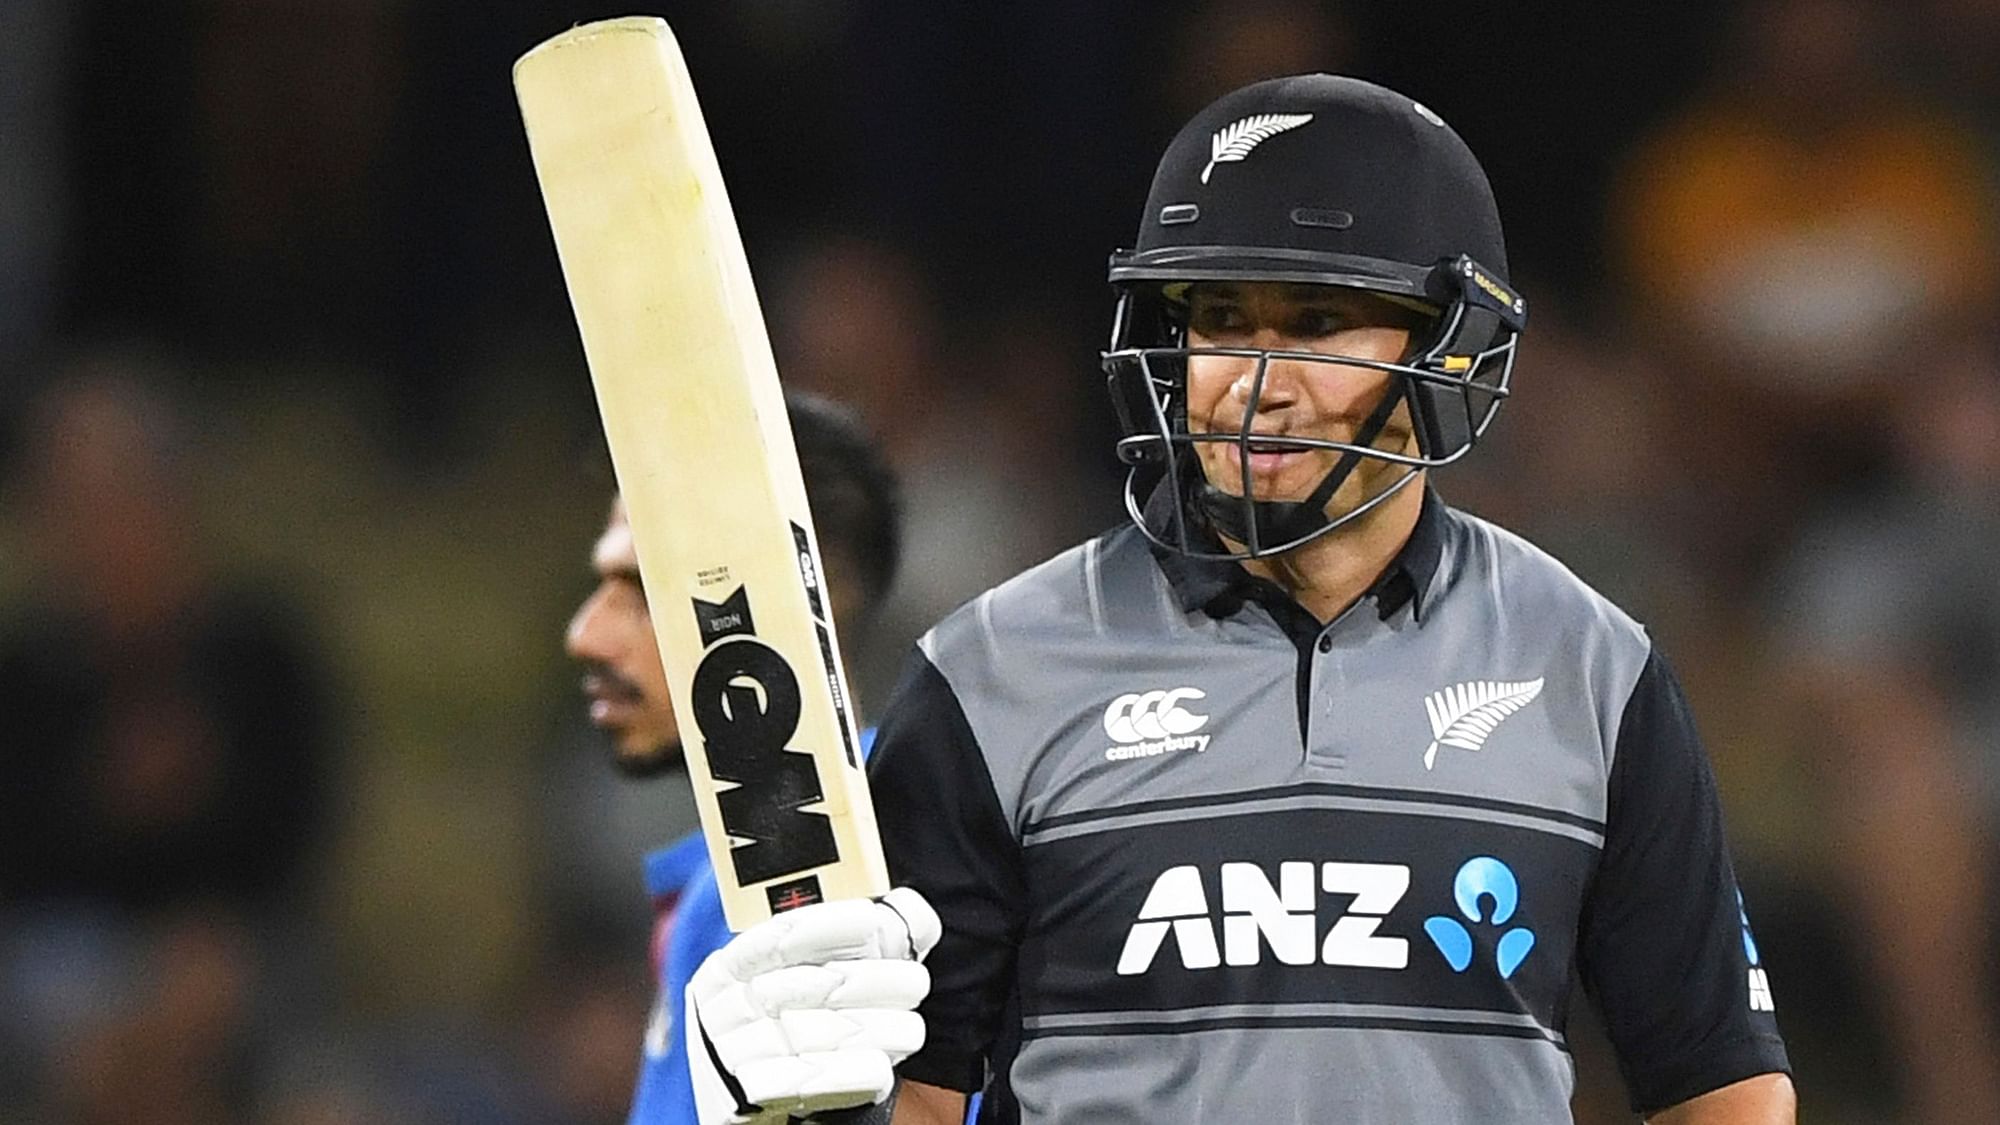 New Zealand batsman Ross Taylor on Wednesday, 5 February said their ODI side can deal with pressure situations a lot better than the Twenty20 side which lost the preceding five-match series 0-5.